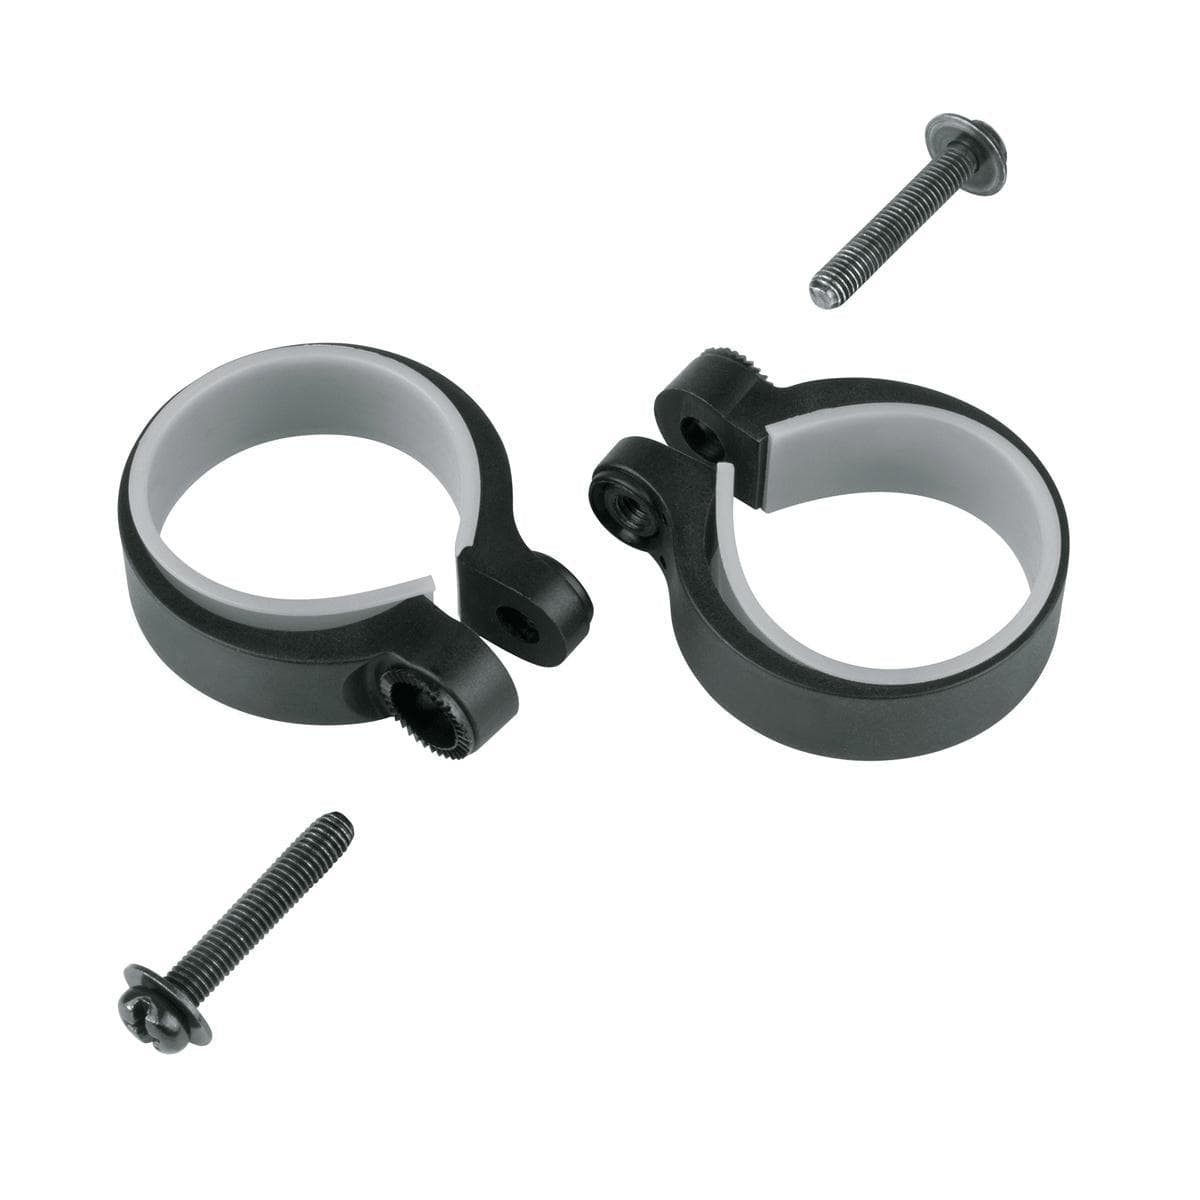 Sks Stay Mounting Clamps 2 Pcs.:  26.5-30.5Mm